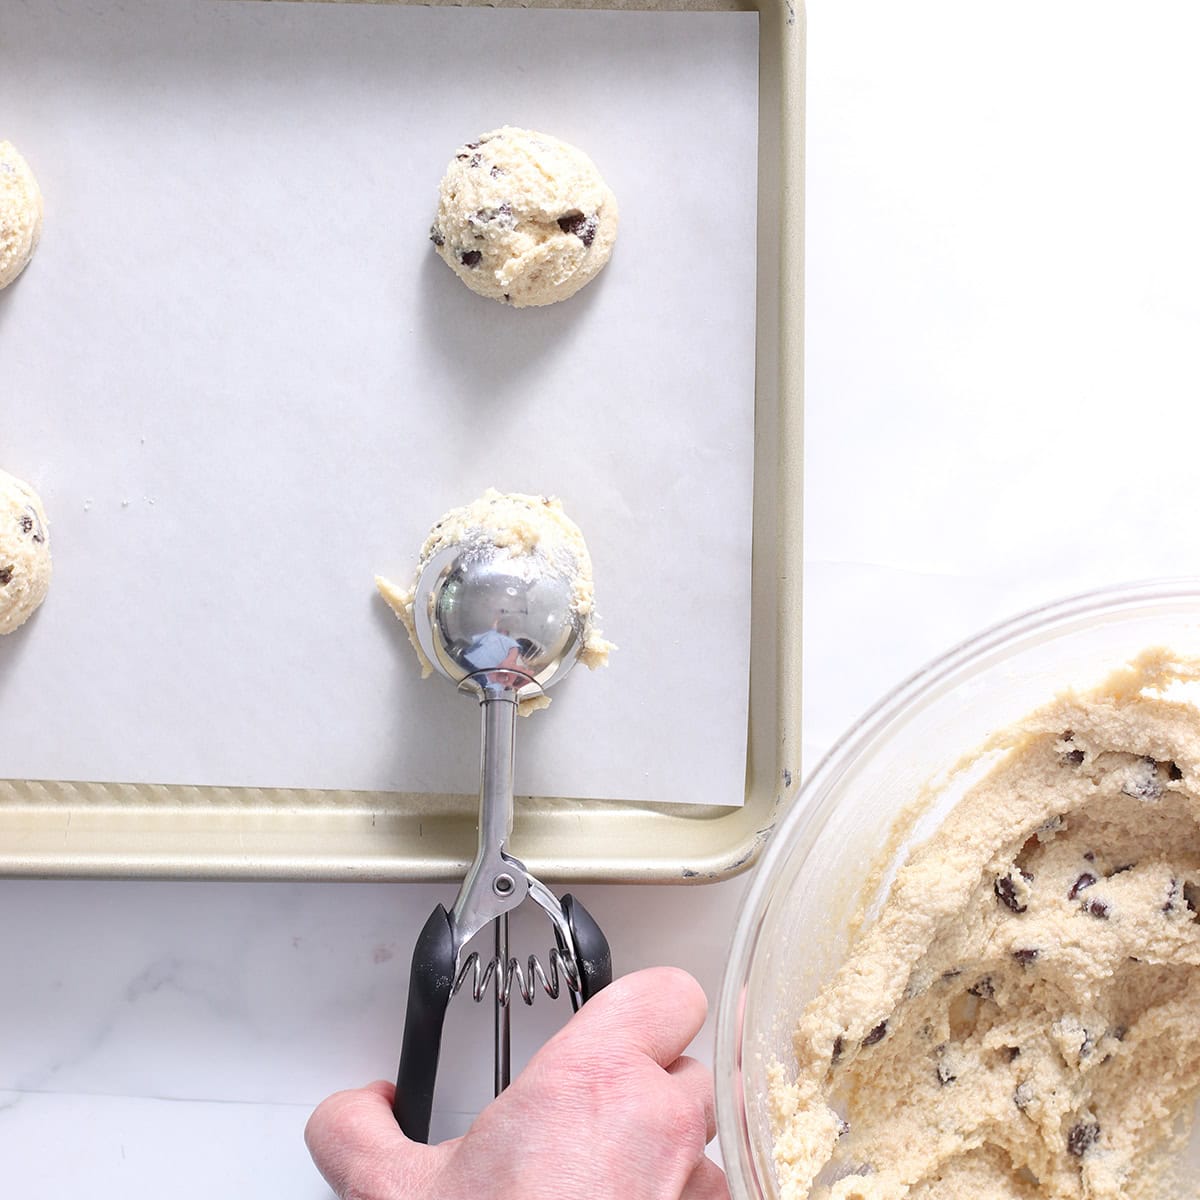 thin and crispy chocolate chip cookies made with almond flour batter scooped.